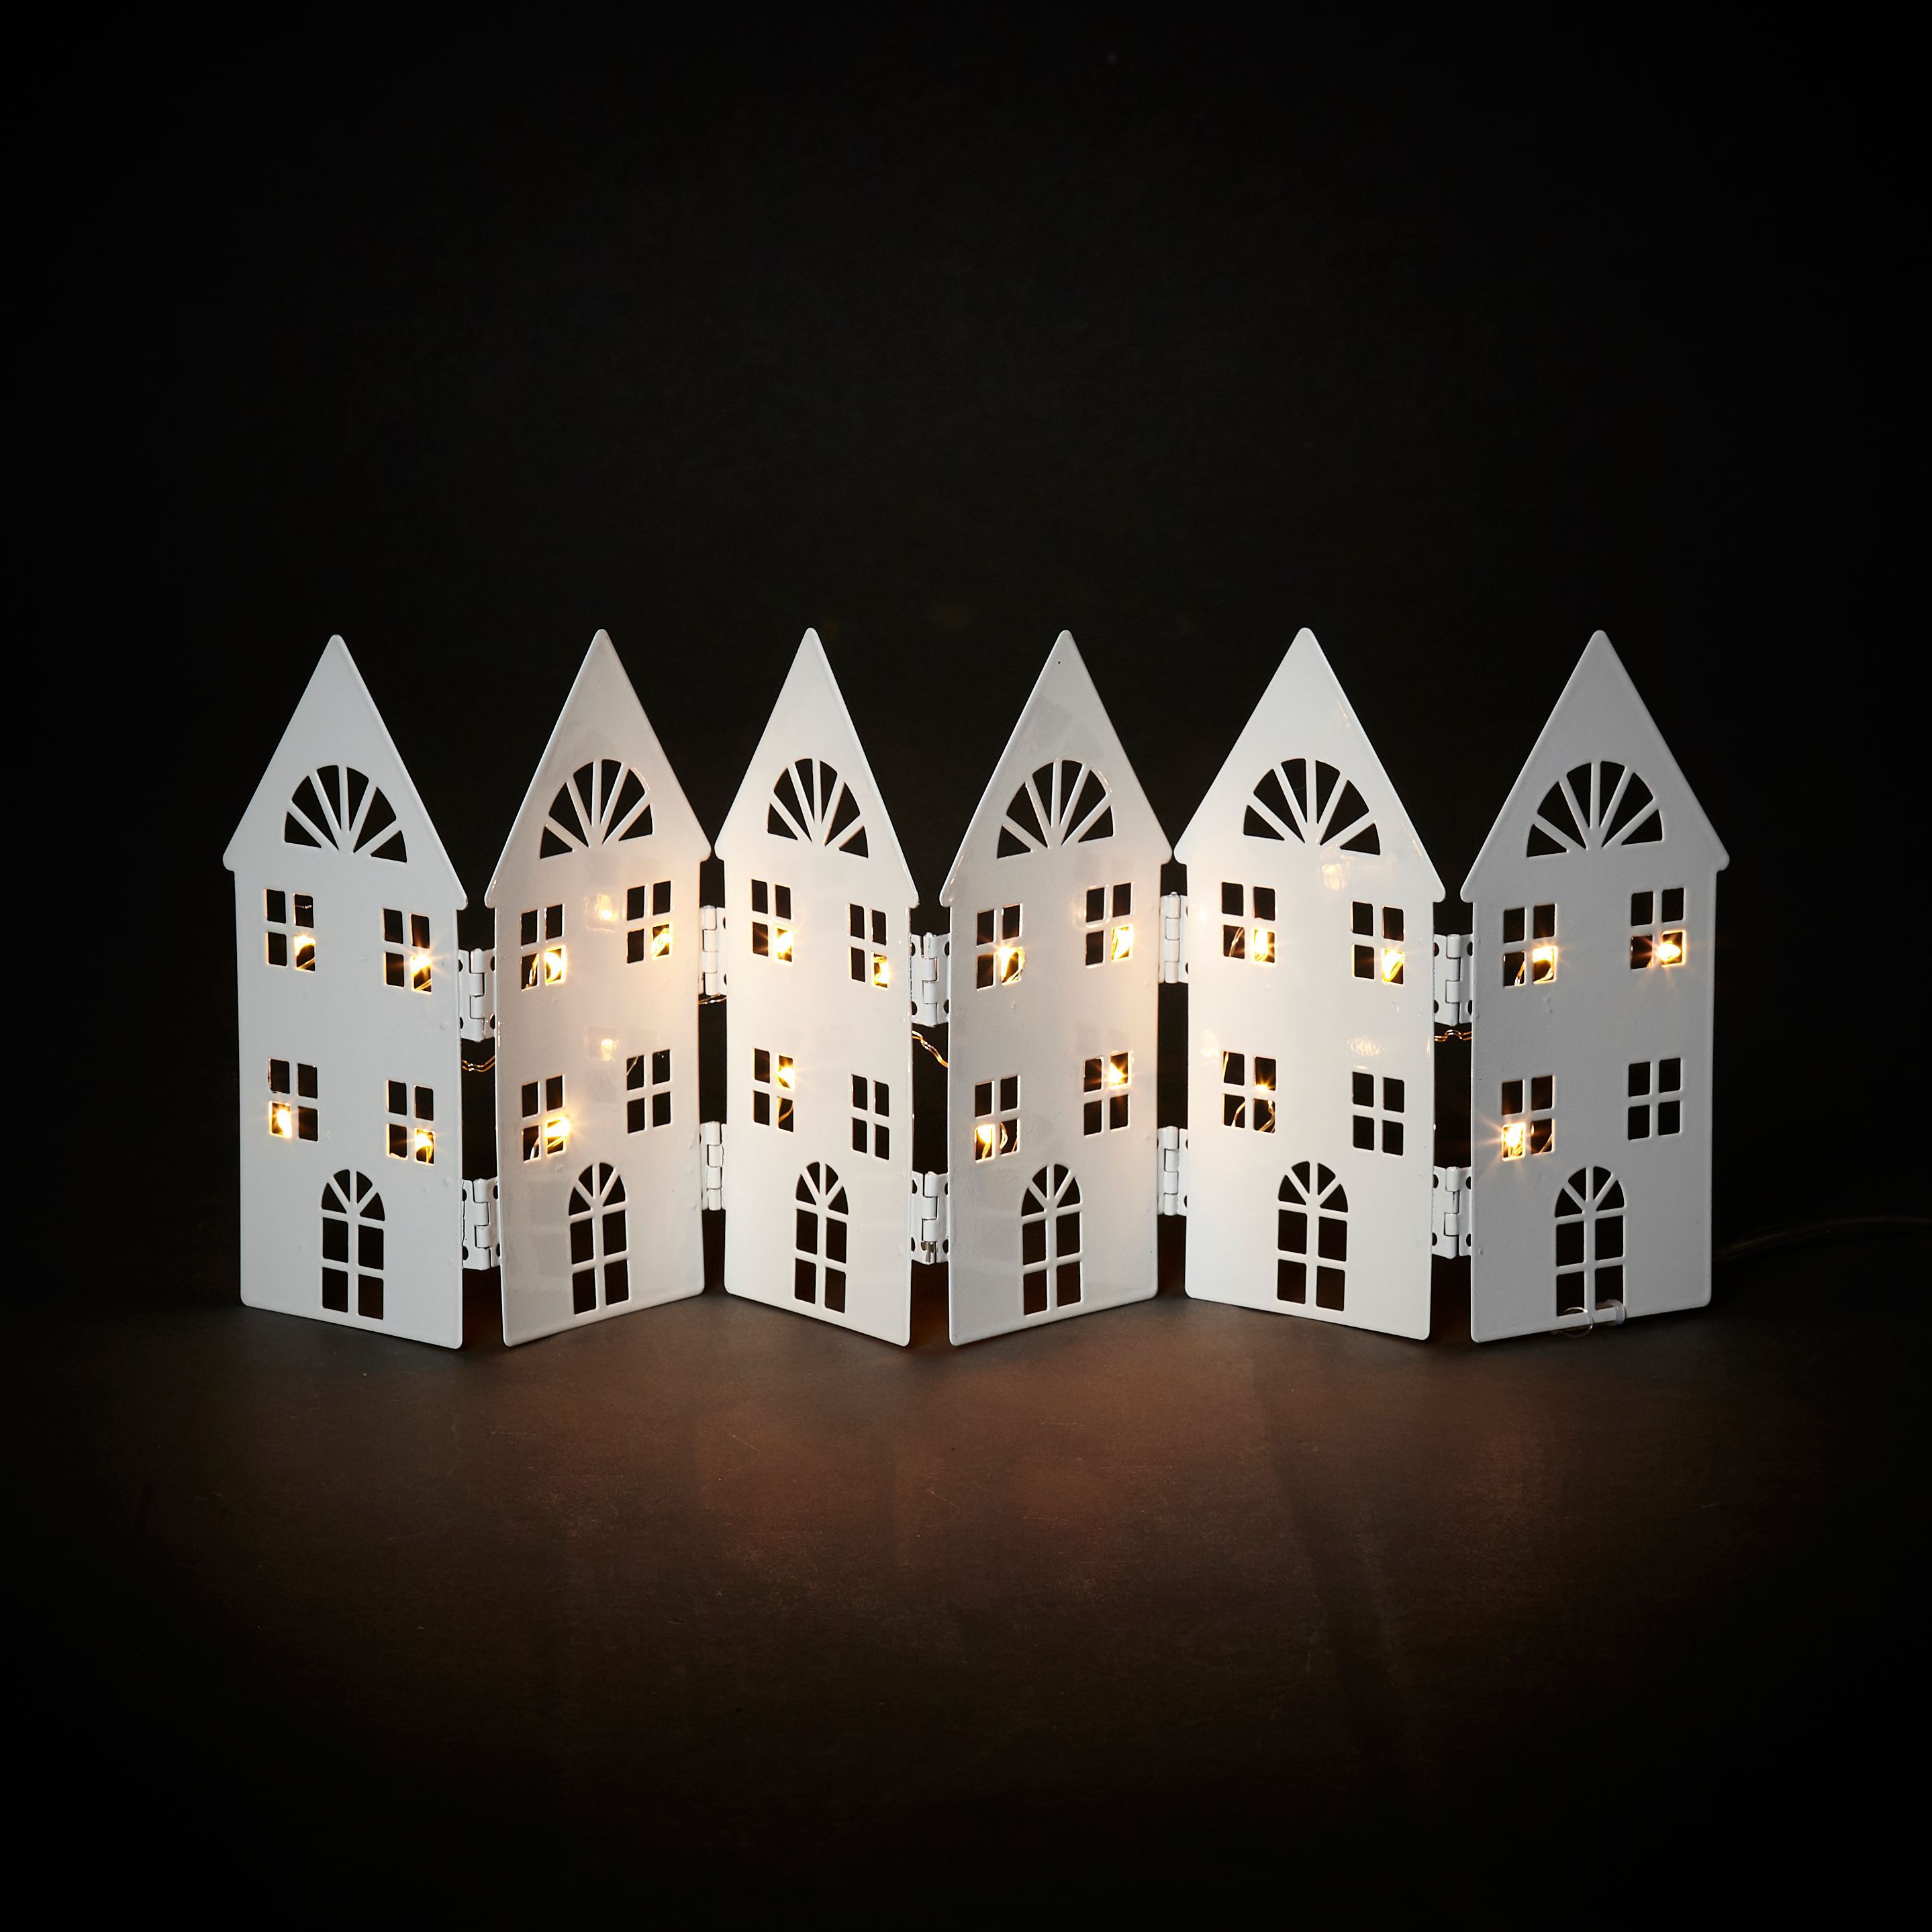 Battery Operated LED Freestanding House Cut Out Silhouette ...